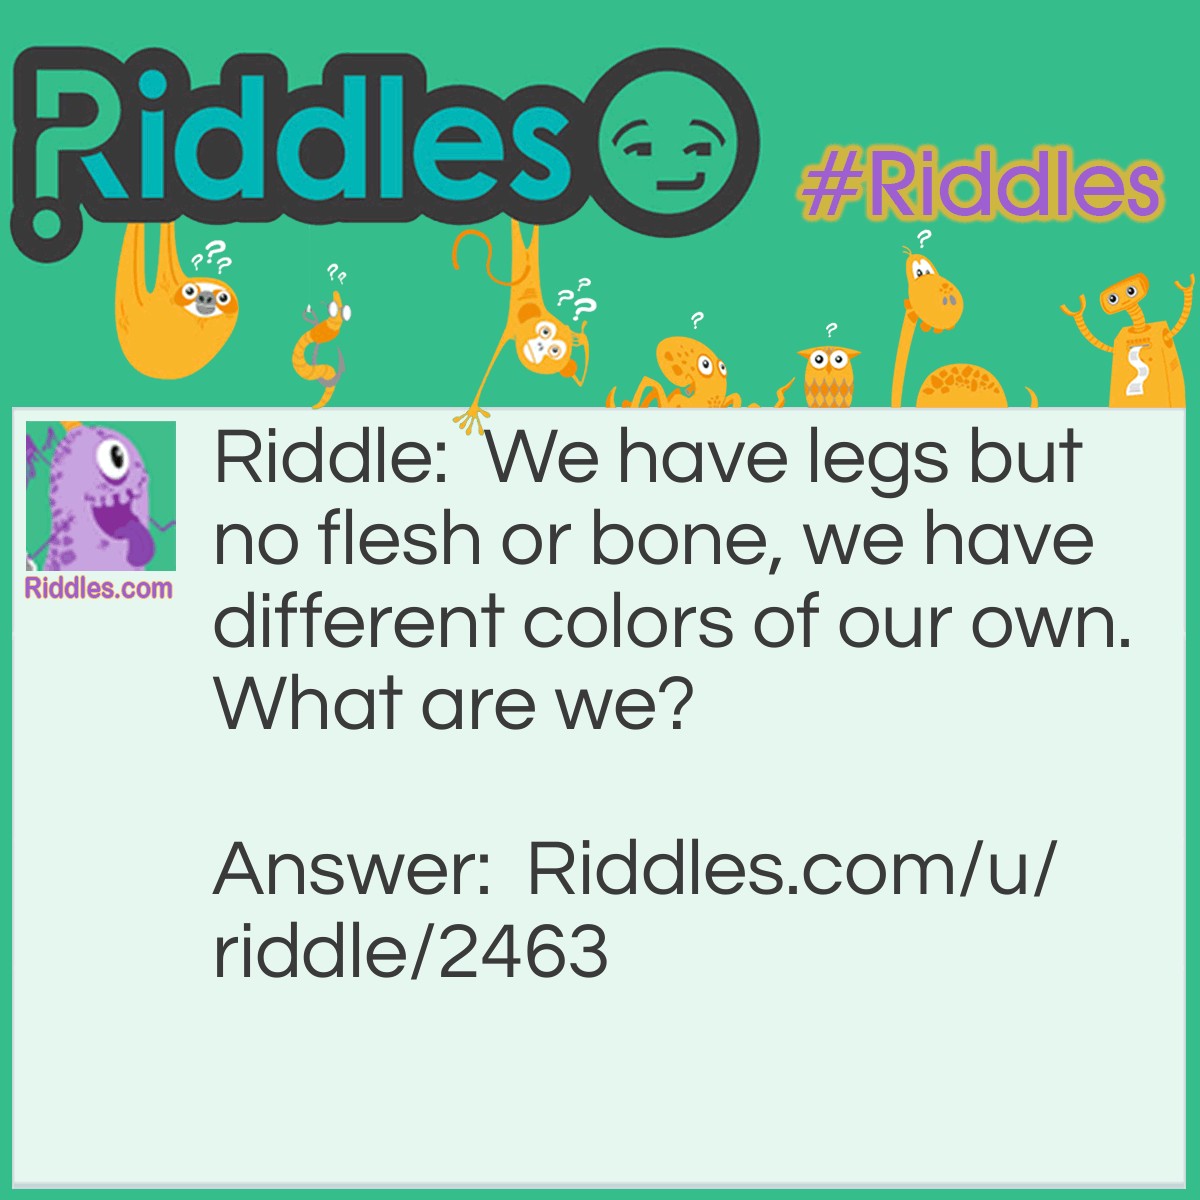 Riddle: We have legs but no flesh or bone, we have different colors of our own. What are we? Answer: Pants.